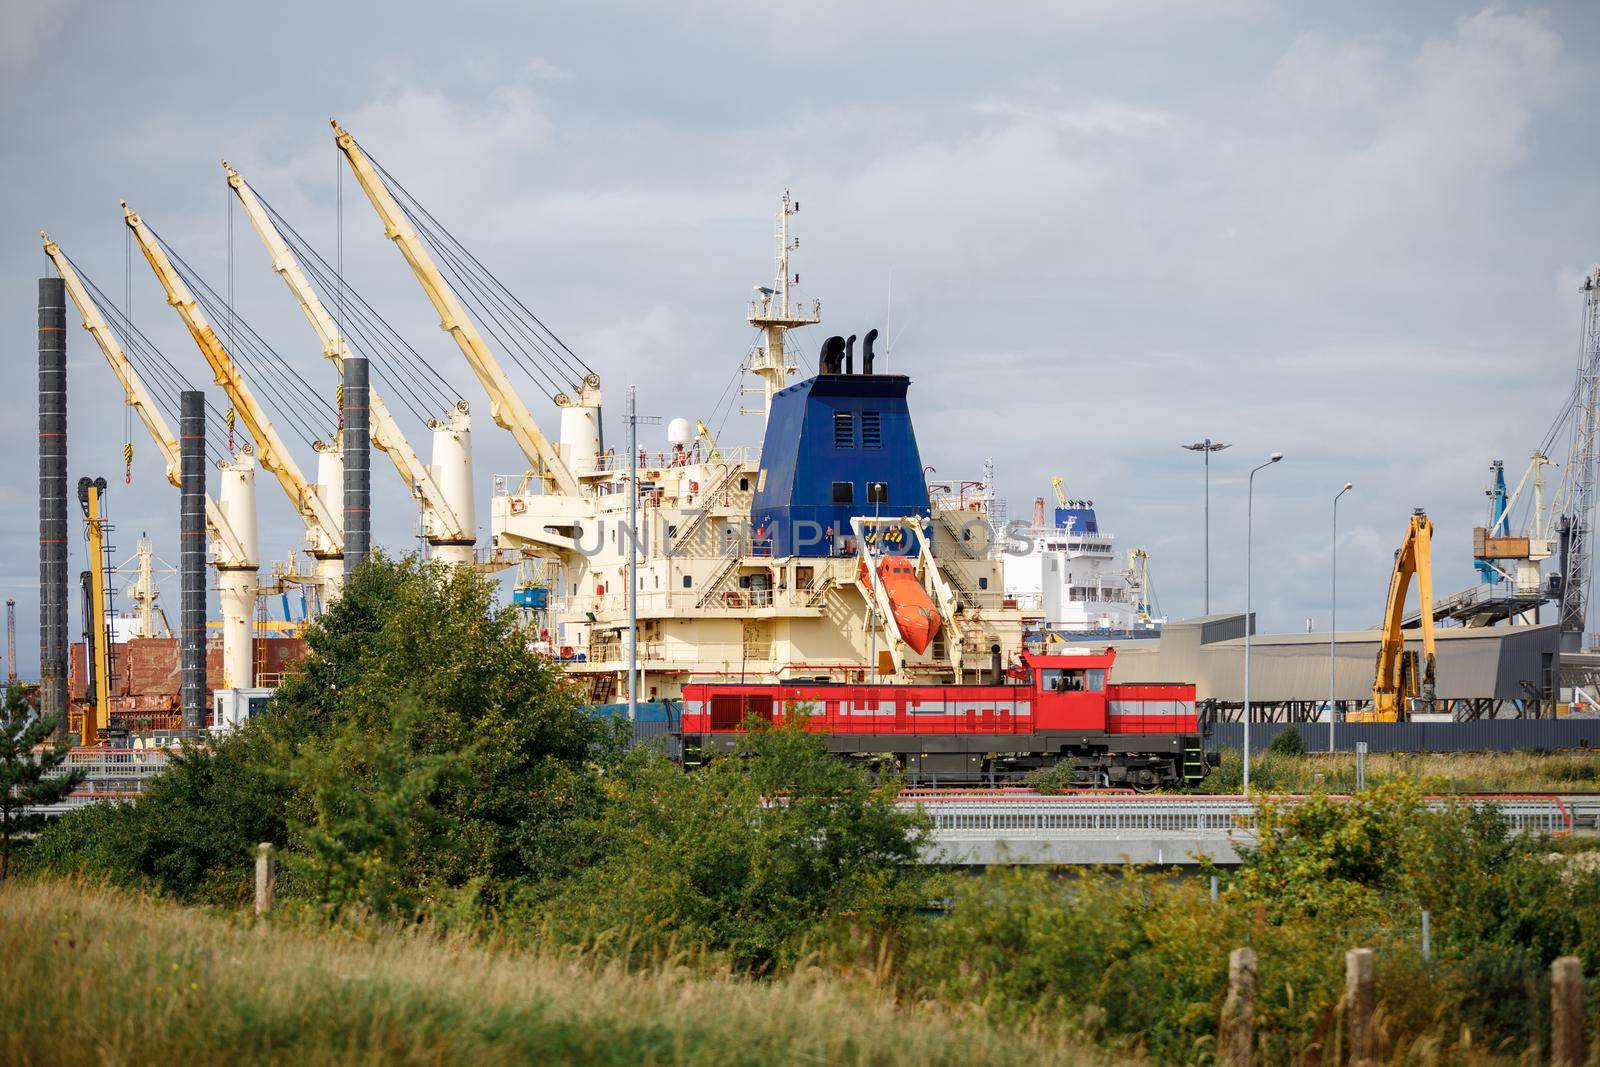 Landscape of Klaipeda port with ships, containers, ferries and cranes. In the foreground is a red steam locomotive running on a railway.